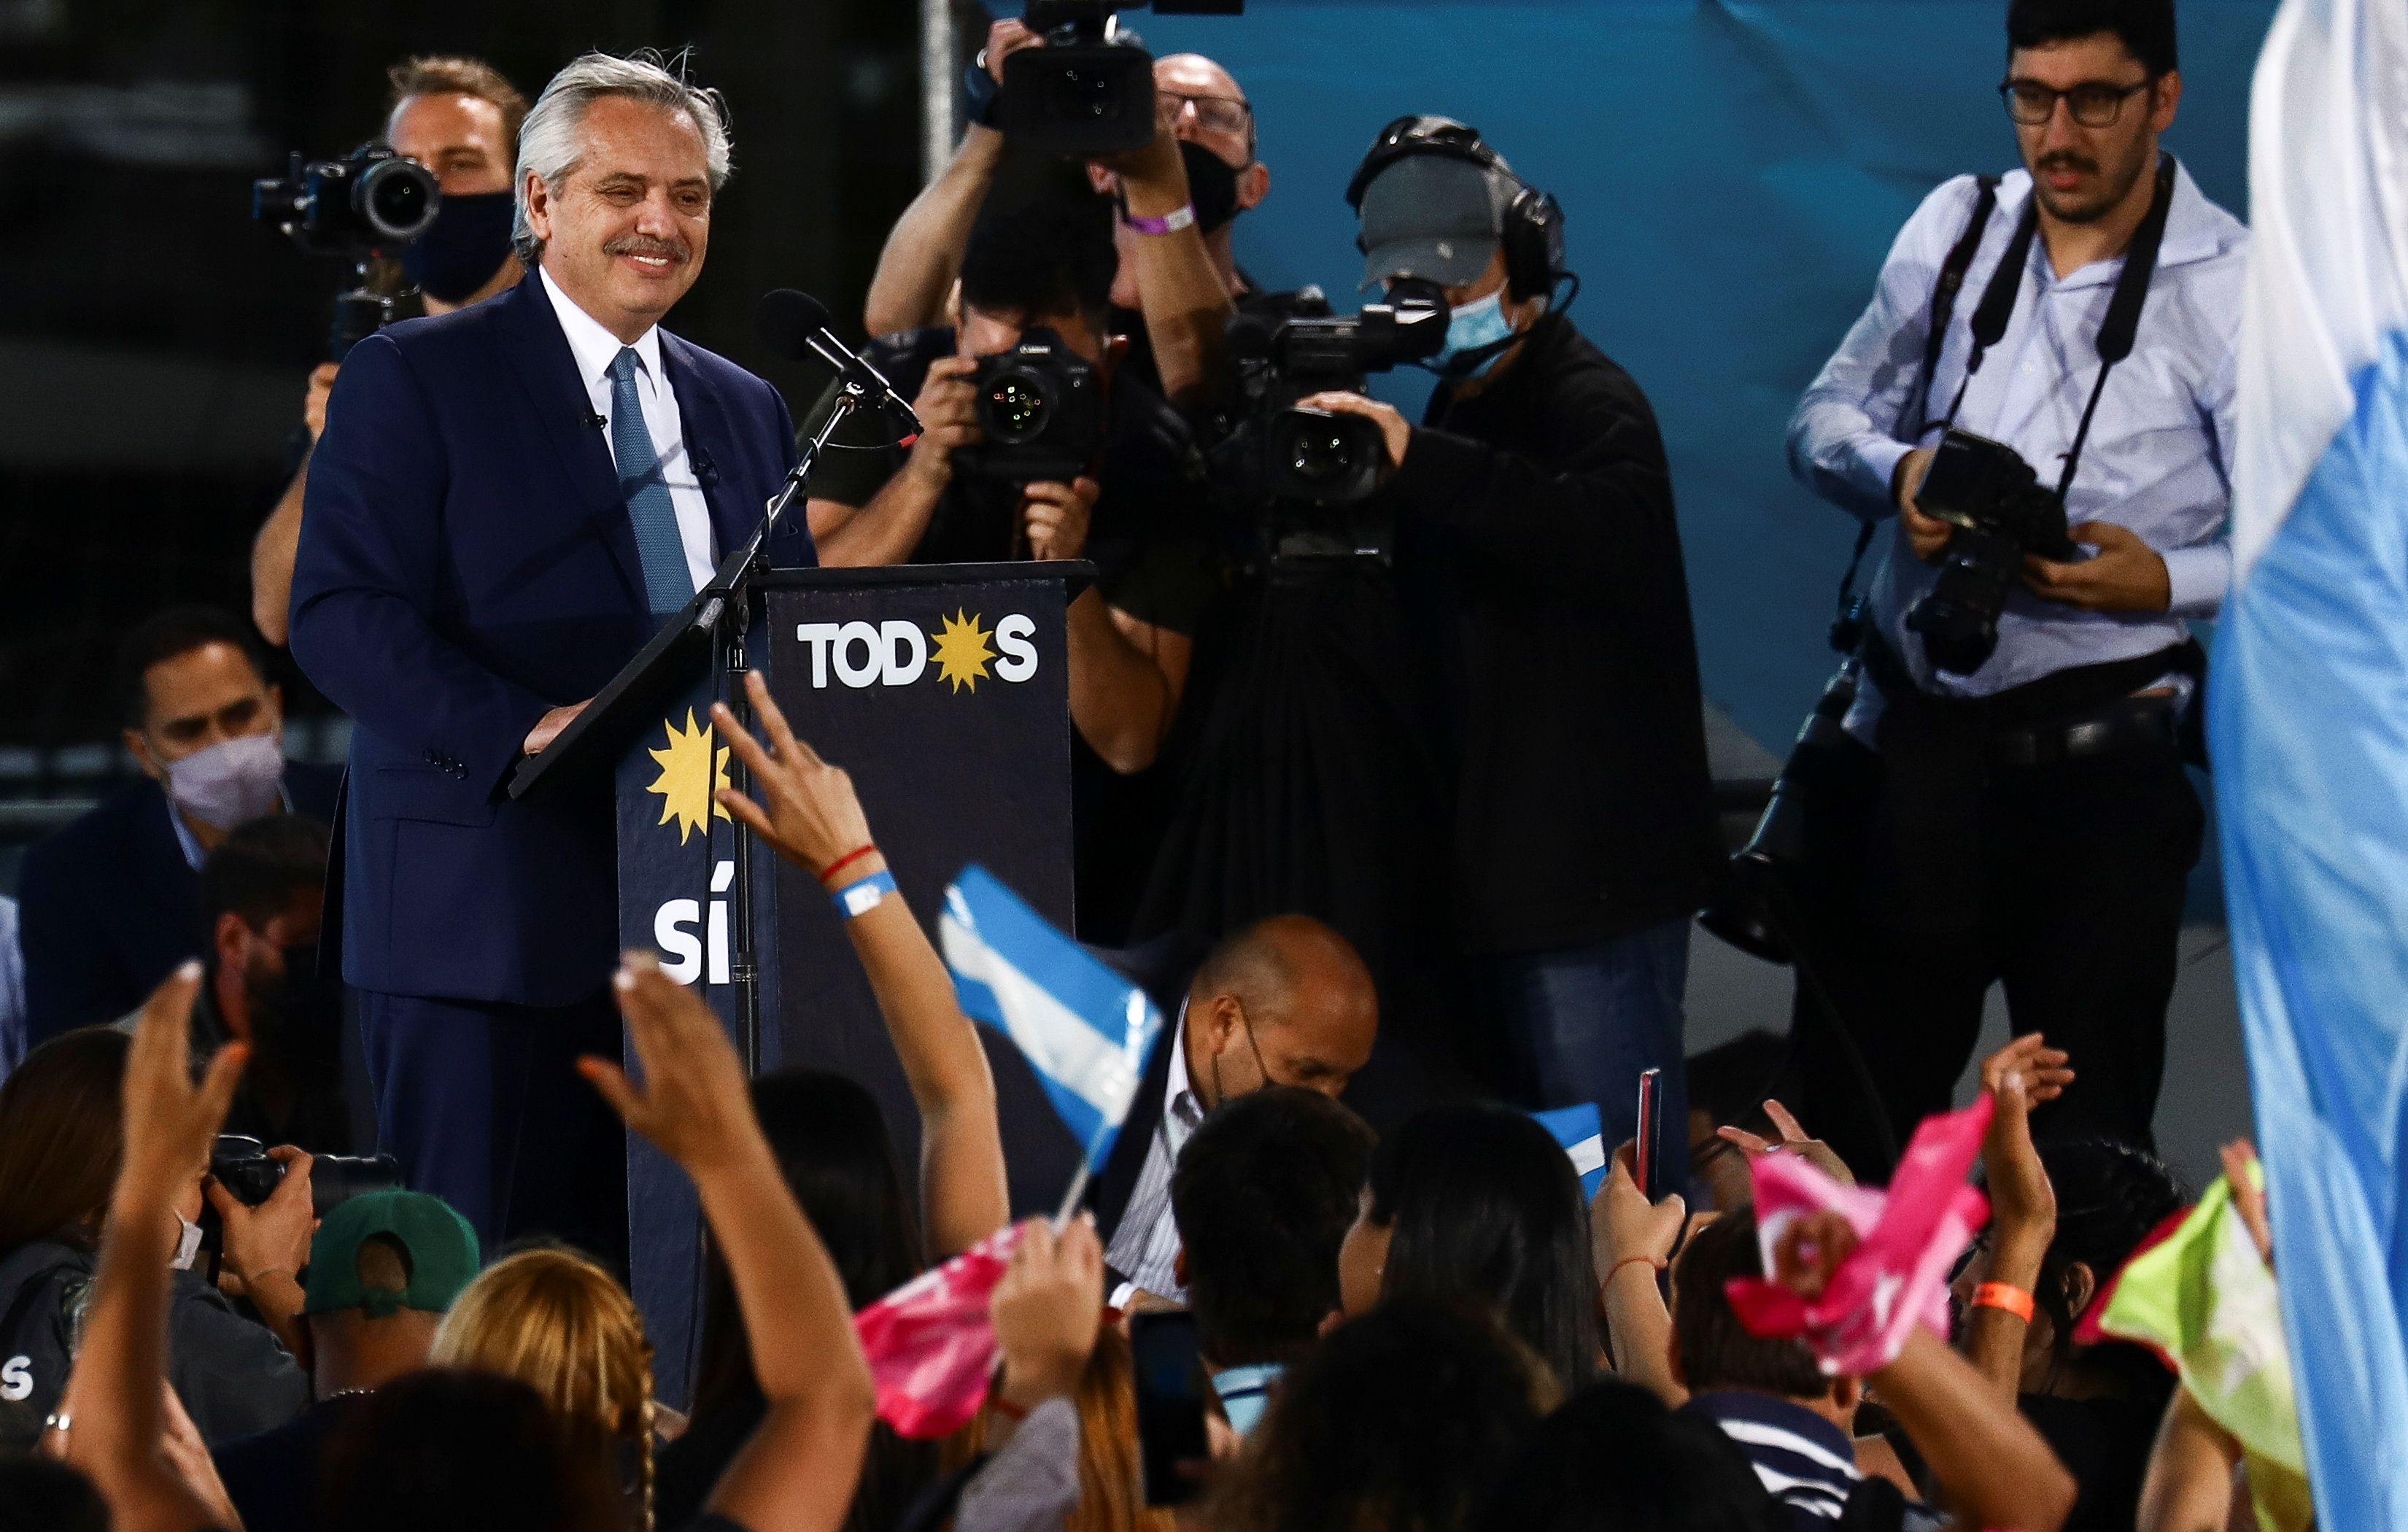 Closing campaign rally before midterm elections in Argentina